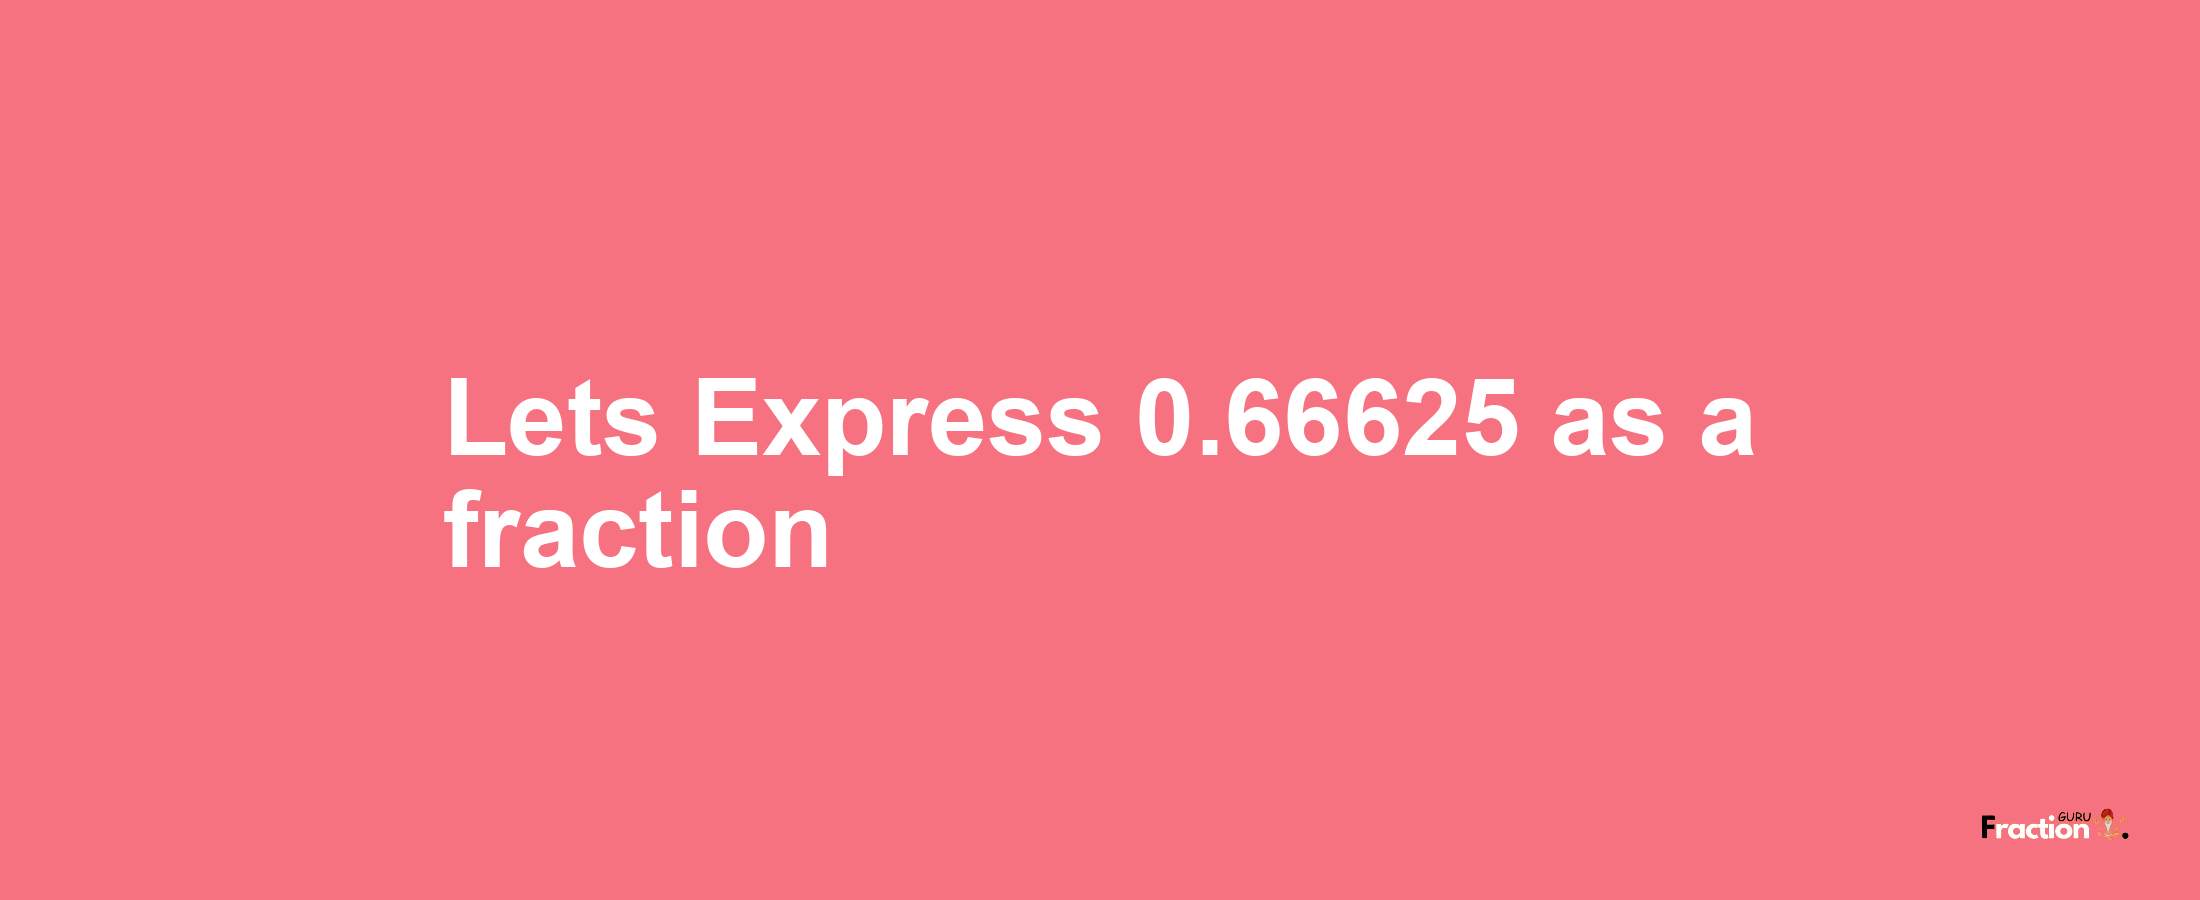 Lets Express 0.66625 as afraction